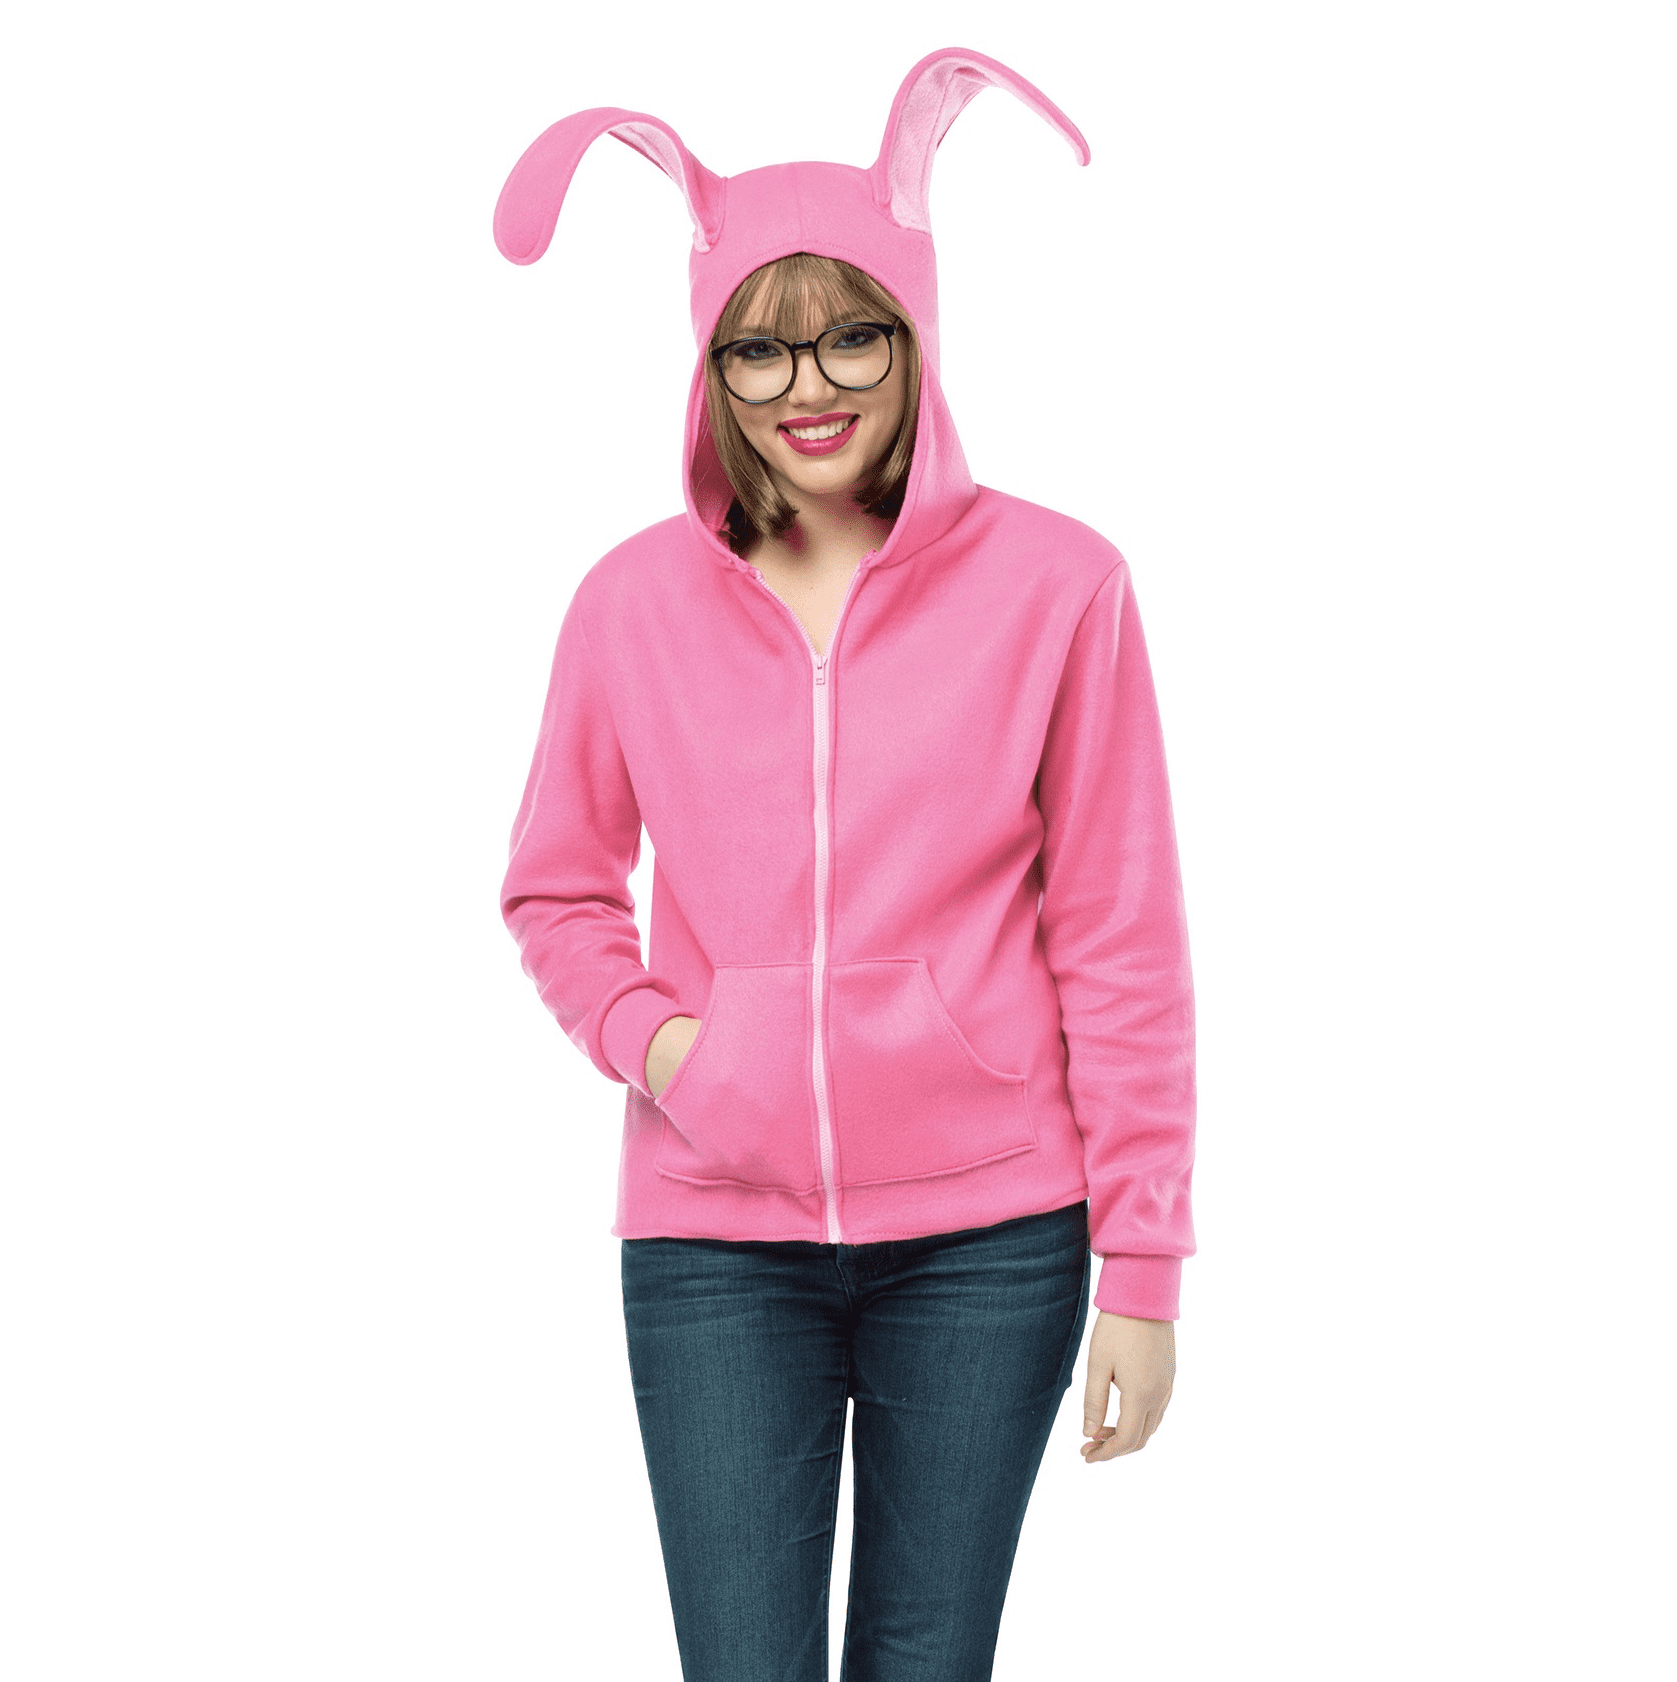 Ralphie Bunny Suit Costume Womens A Christmas Story Movie Adult Pink Easter